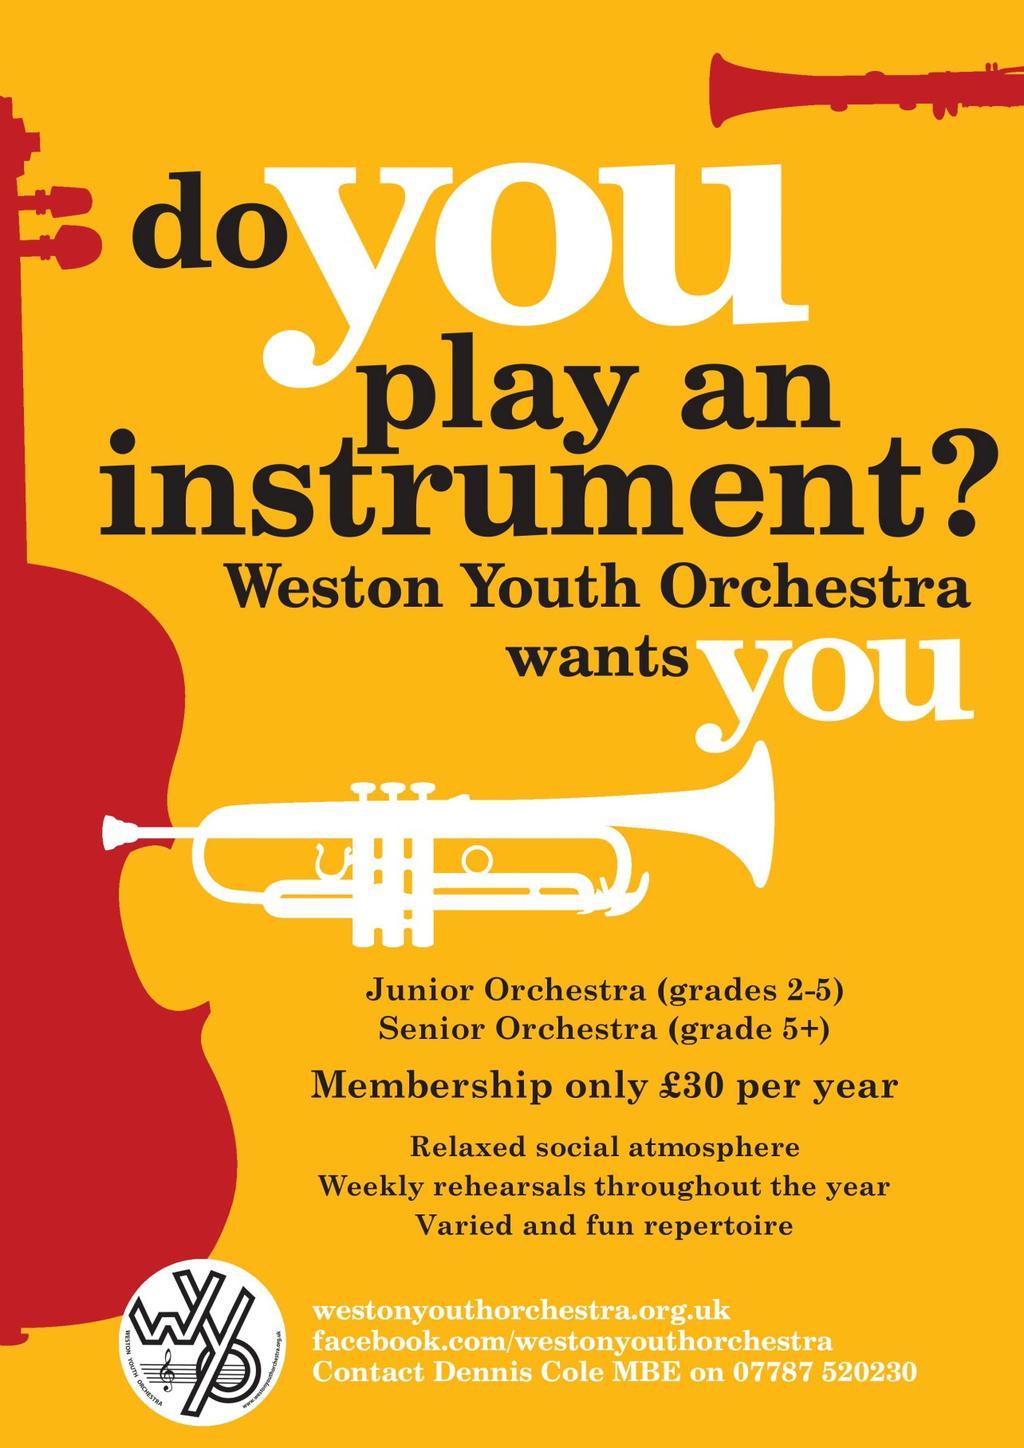 Weston Youth Orchestra November Concert Weston Youth Orchestra would like to welcome you to our second Autumn Concert which includes a wide variety of music, performances from both our Junior and